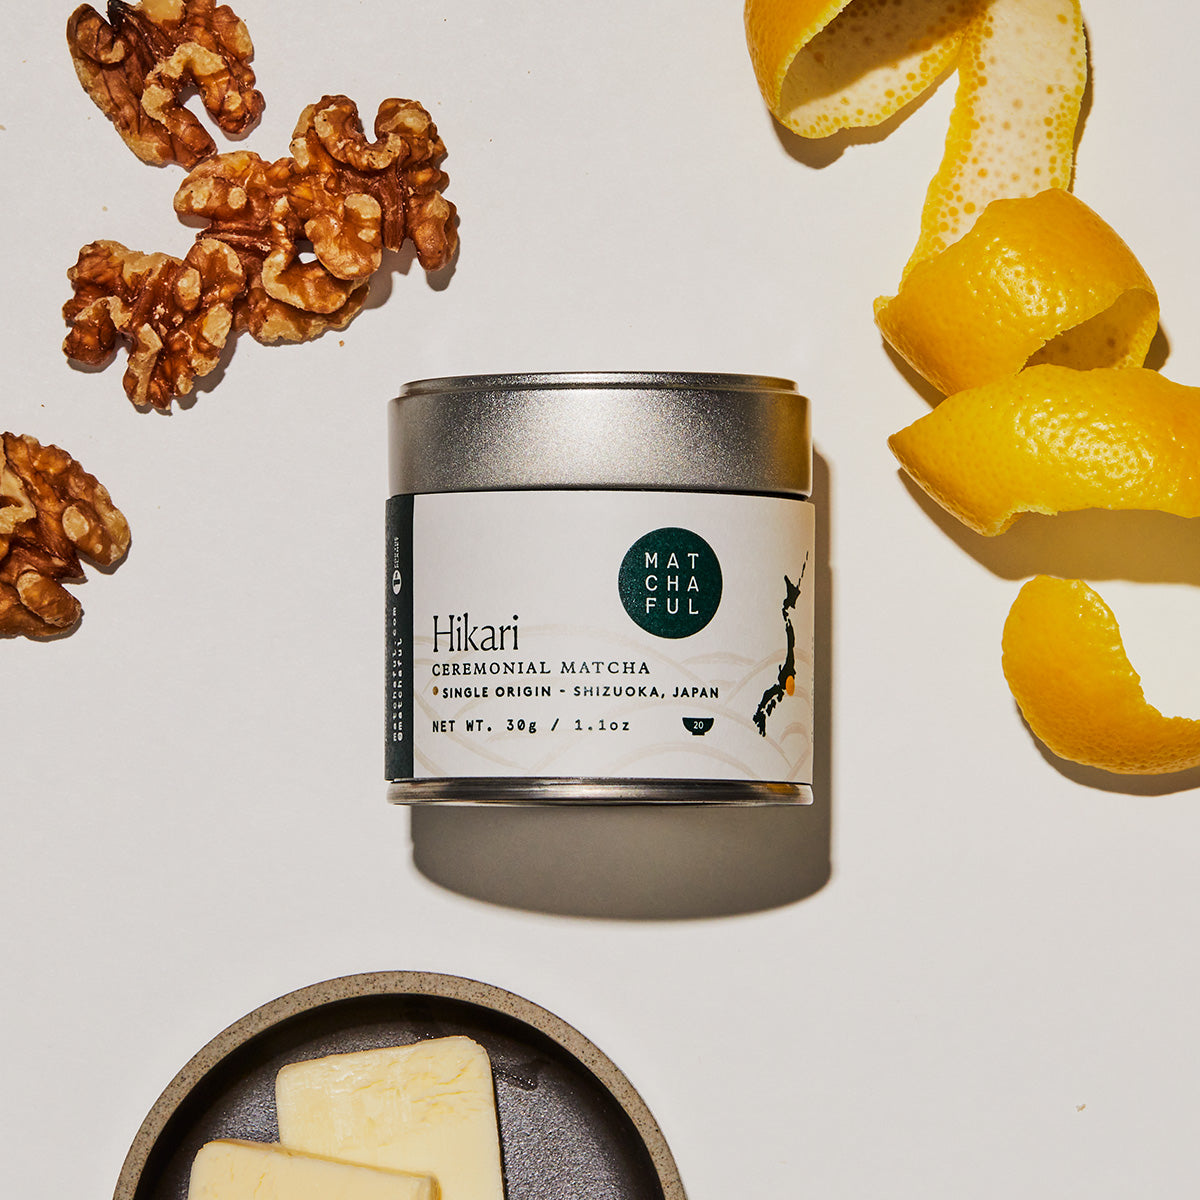 Matchaful Hikari Ceremonial Matcha tin surrounded by tasting notes of walnuts, lemon, and butter